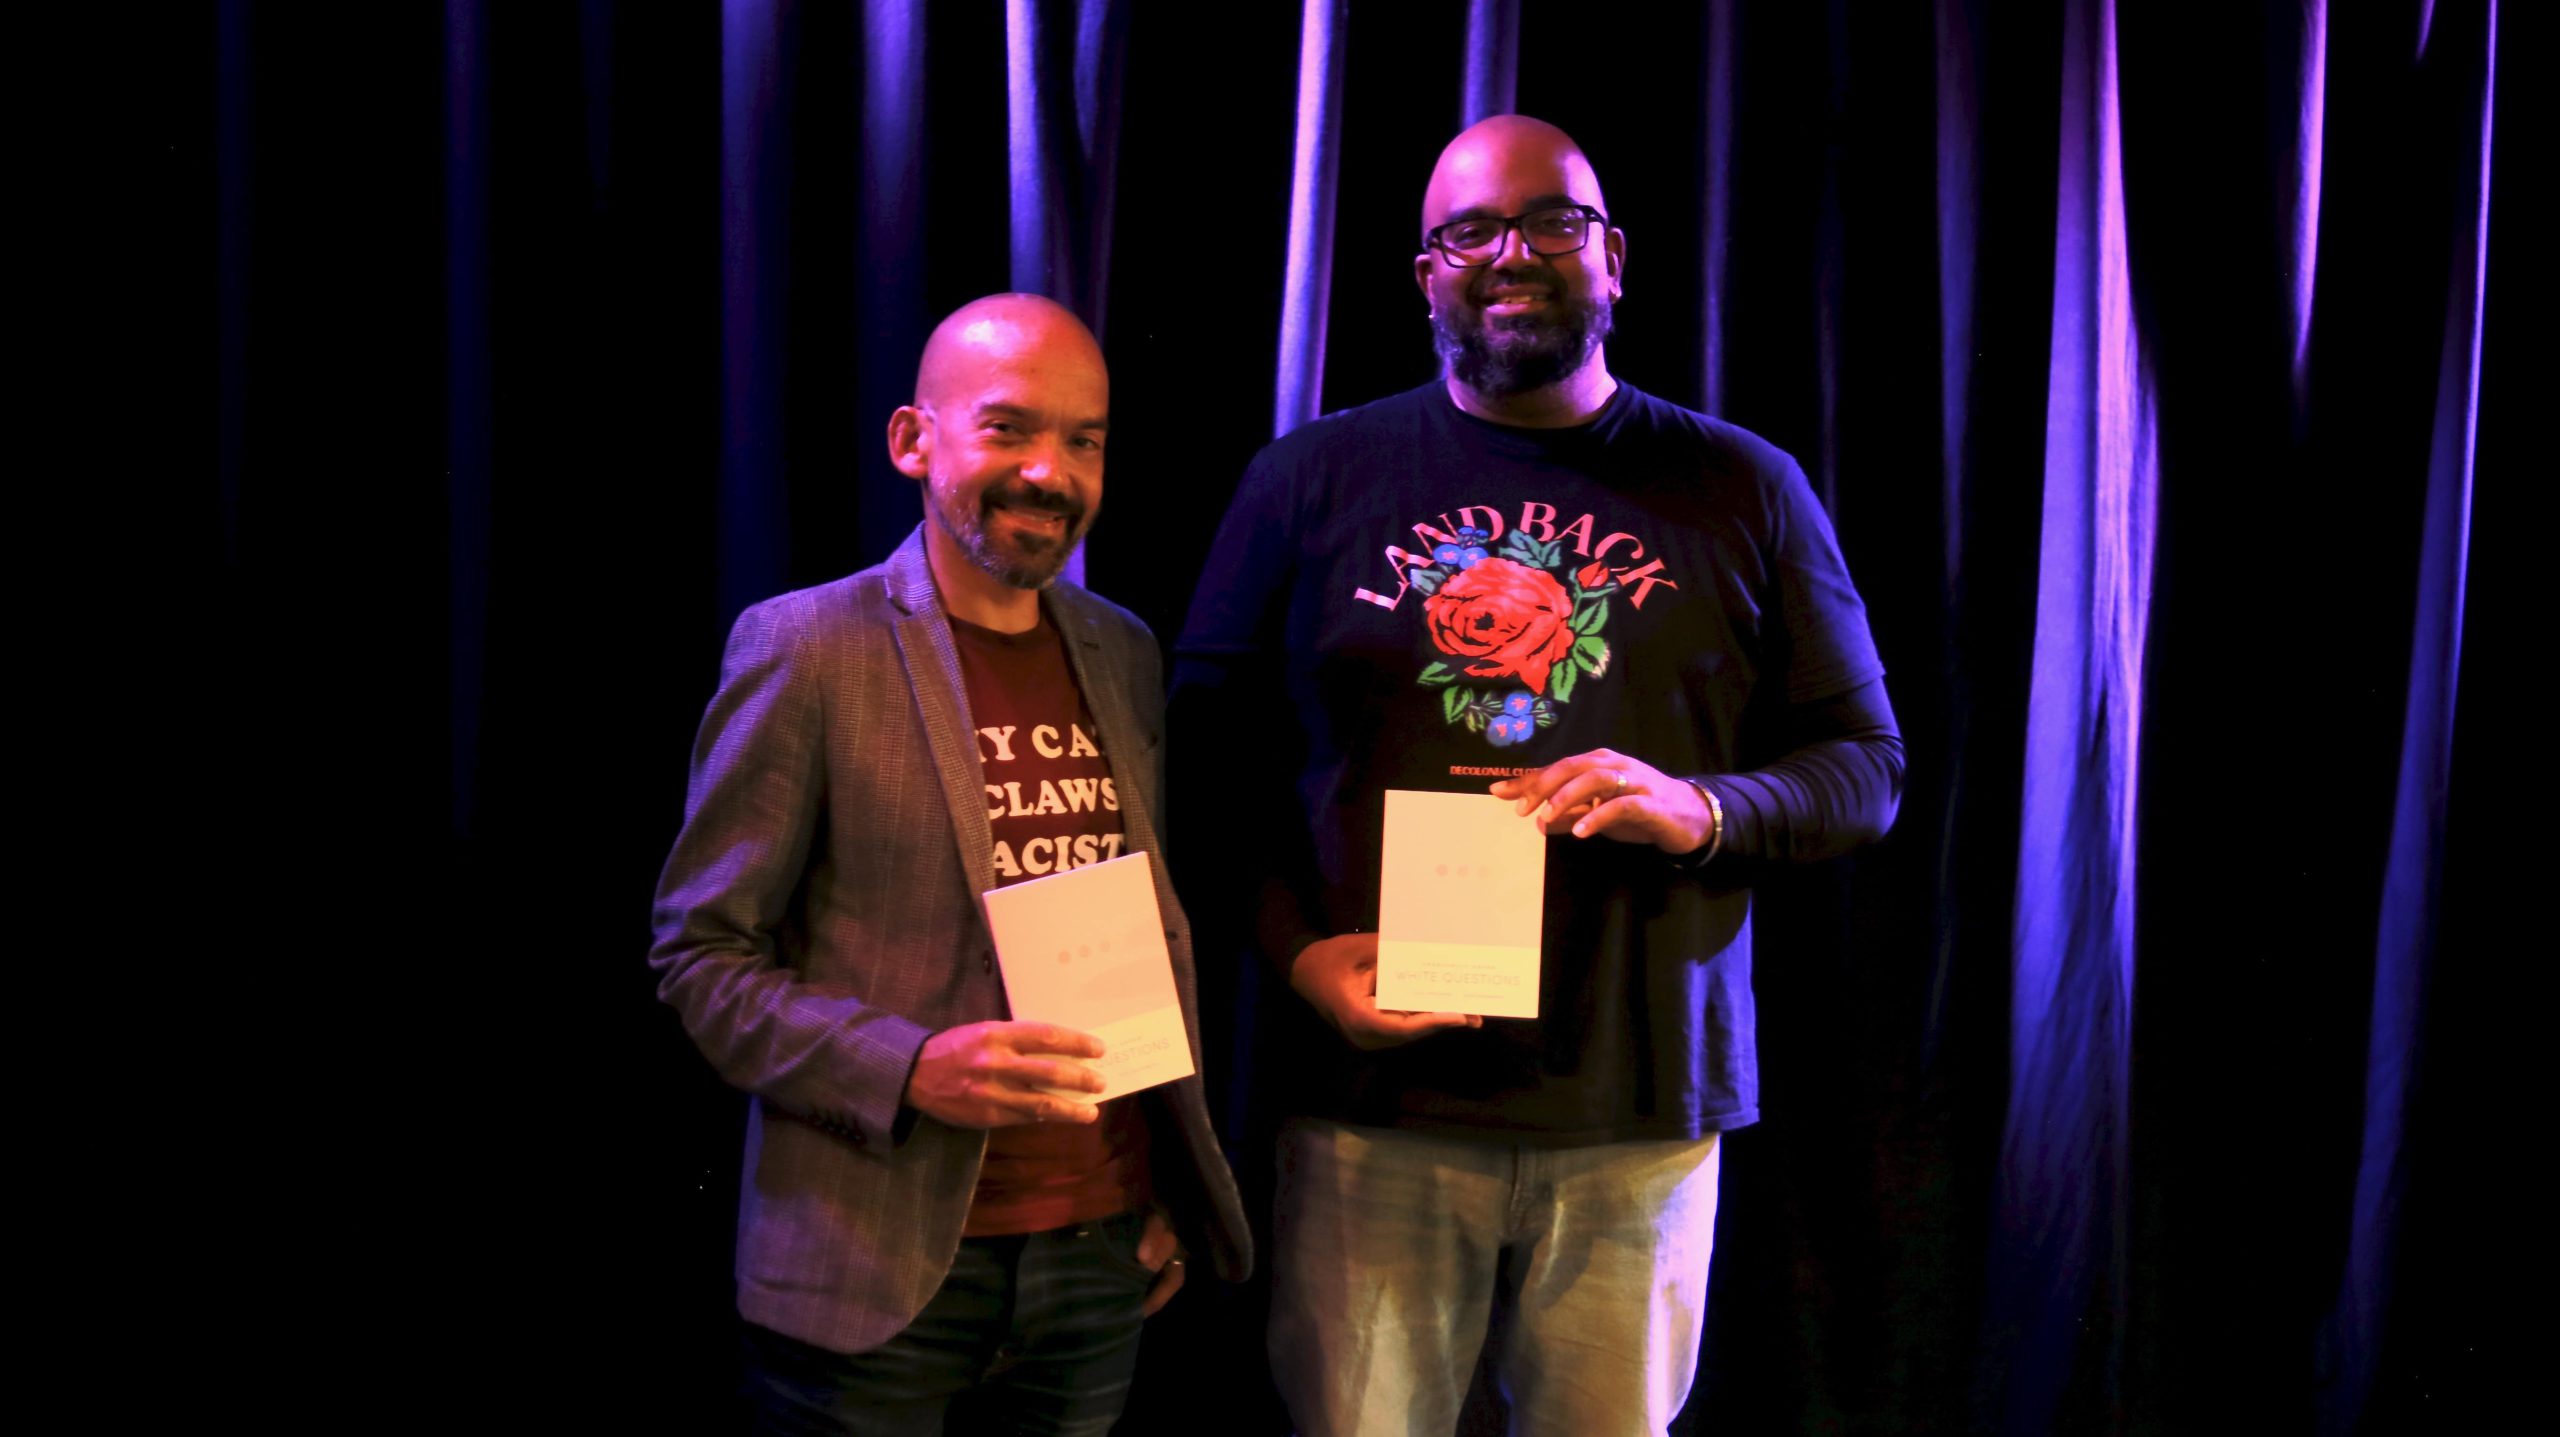 Ajay Parasram (left) and Alex Khasnabish (right) hold up their new book, Frequently Asked White Questions, at their book launch held at the Bus Stop Theatre on Nov. 8 in Halifax.
